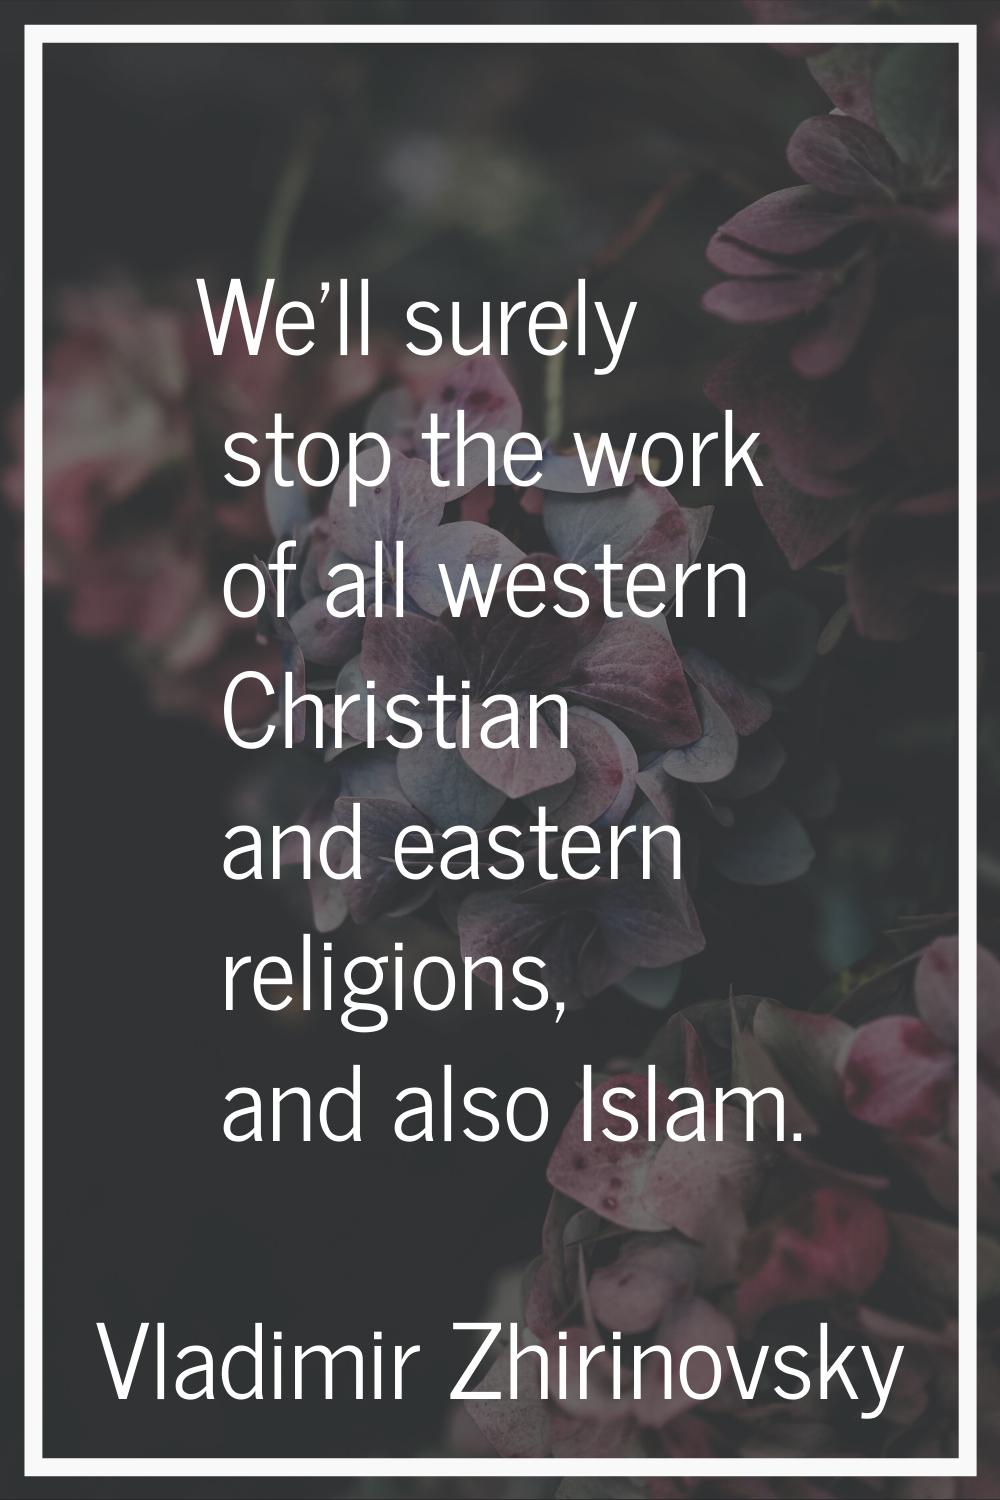 We'll surely stop the work of all western Christian and eastern religions, and also Islam.